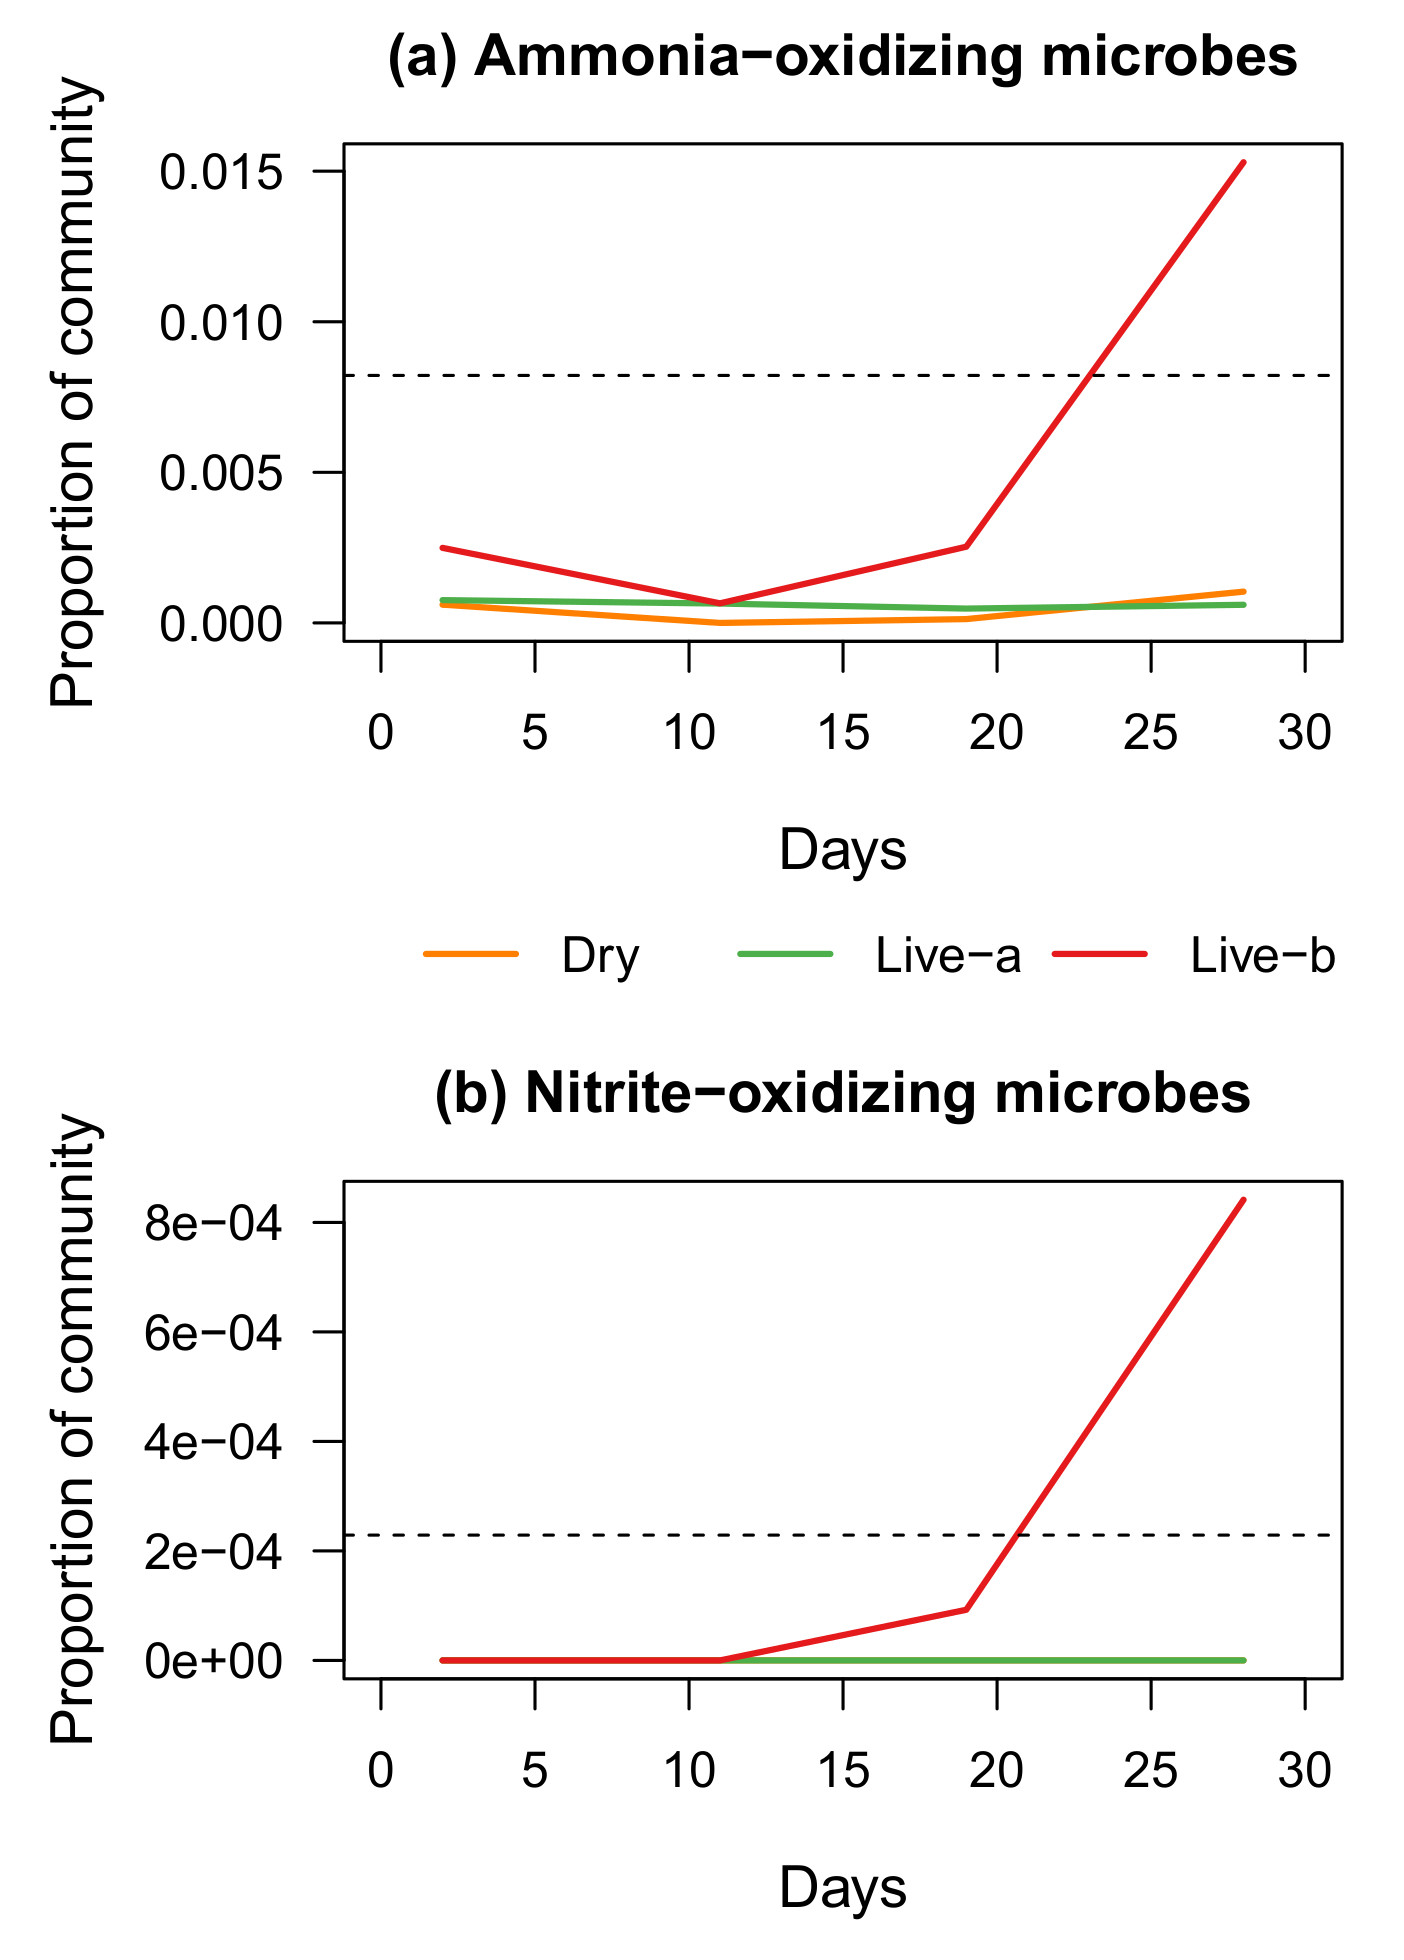 Figure 6: Relative levels of specific groups of microbes with nitrifying activity.